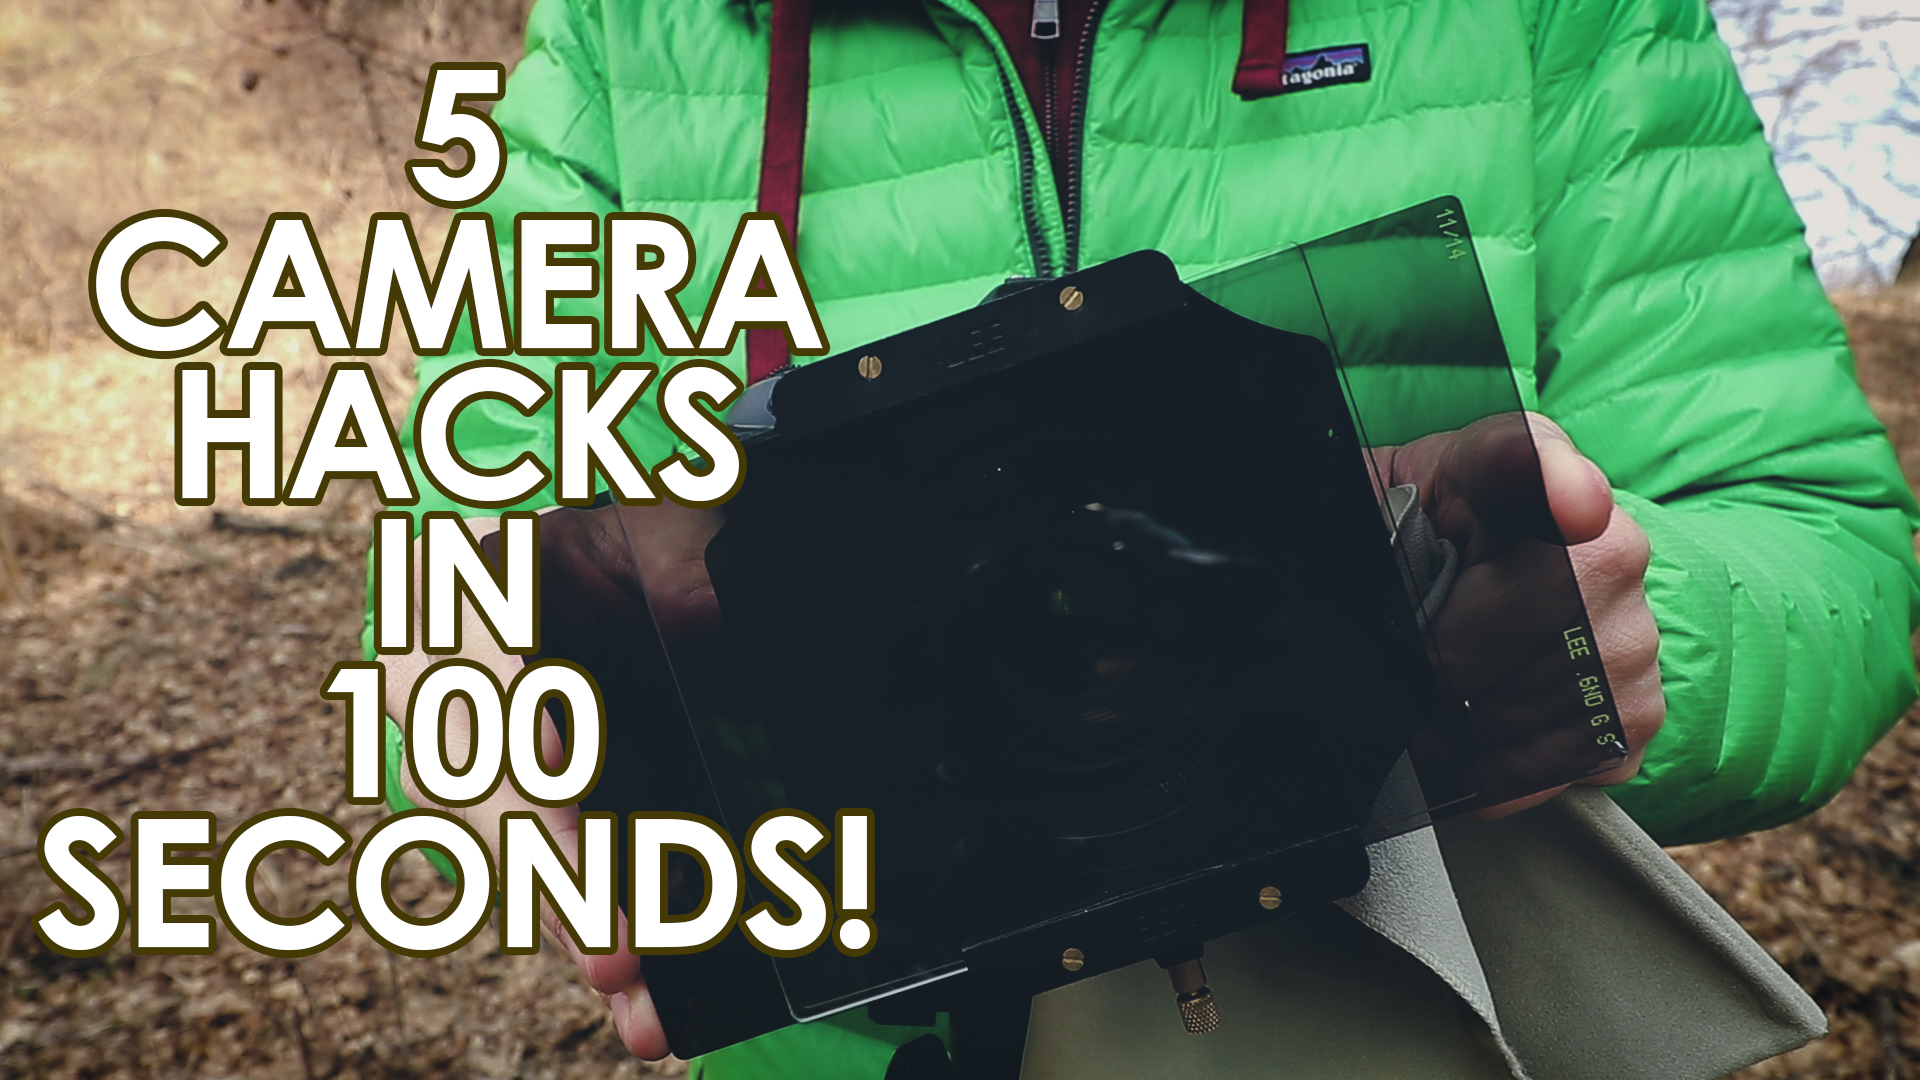 5 Hacks to UP your PHOTOGRAPHY in 100 seconds!